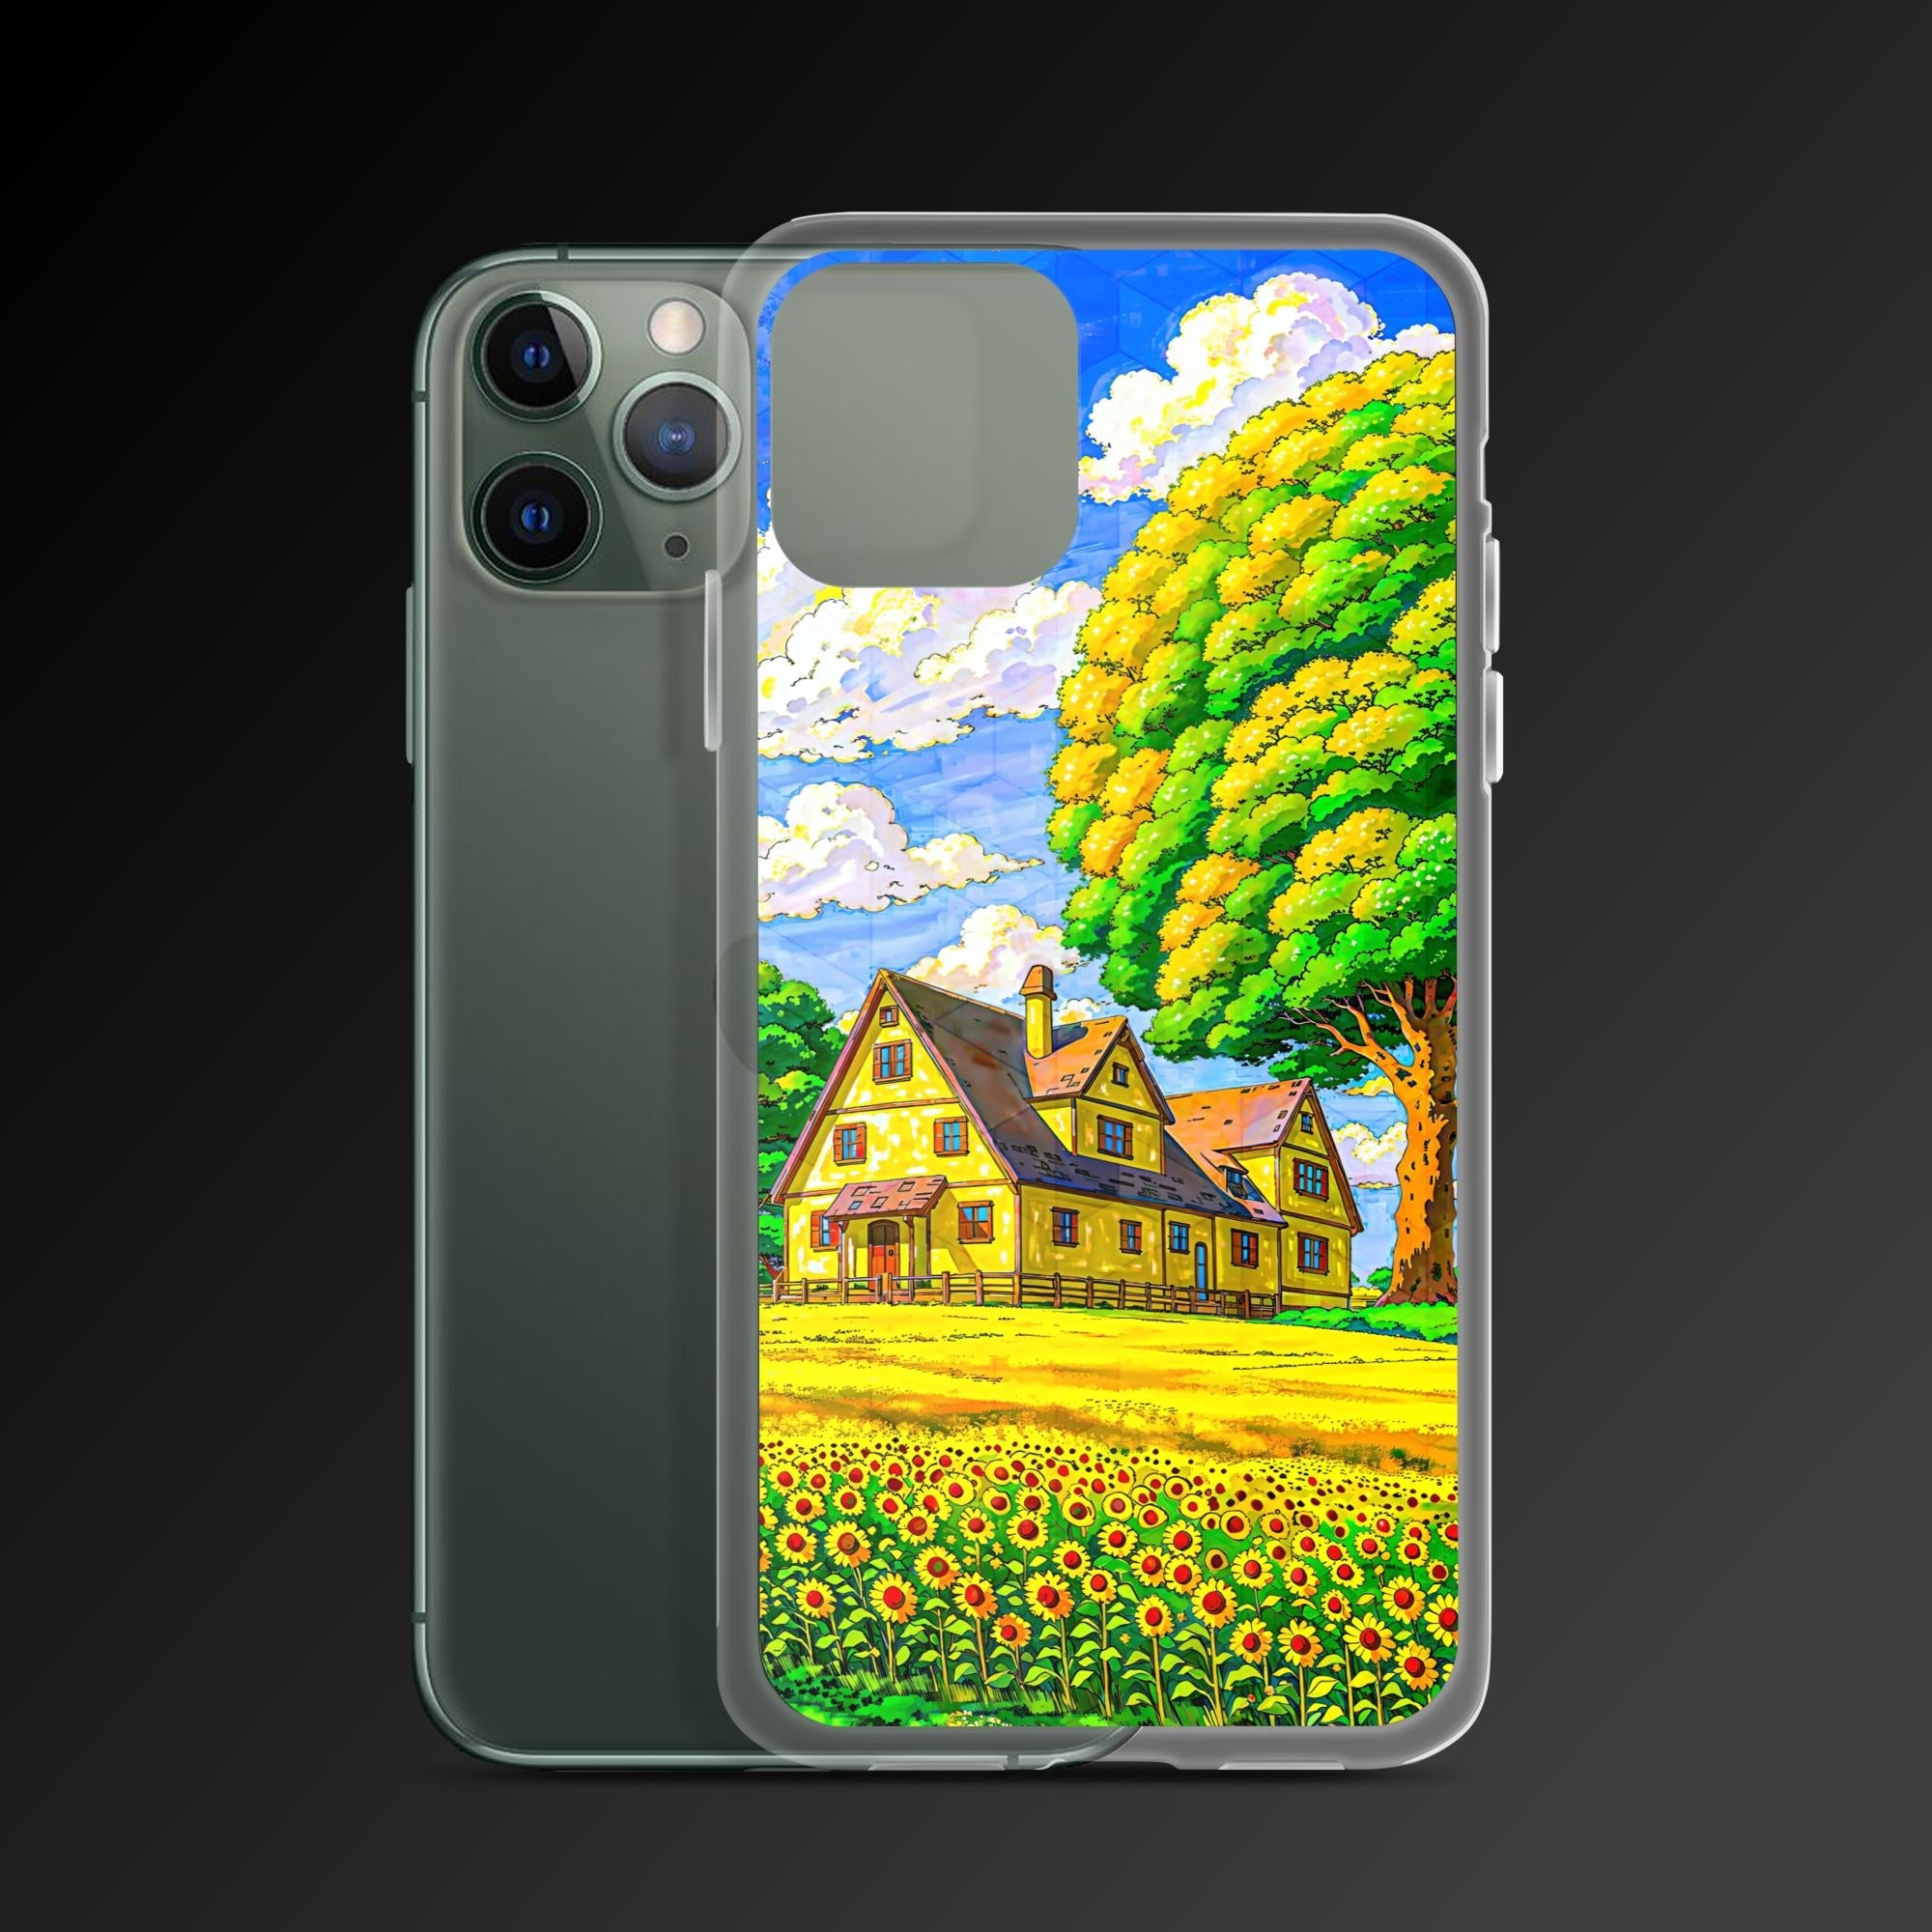 "Summertime reality" clear iphone case - Clear iphone case - Ever colorful